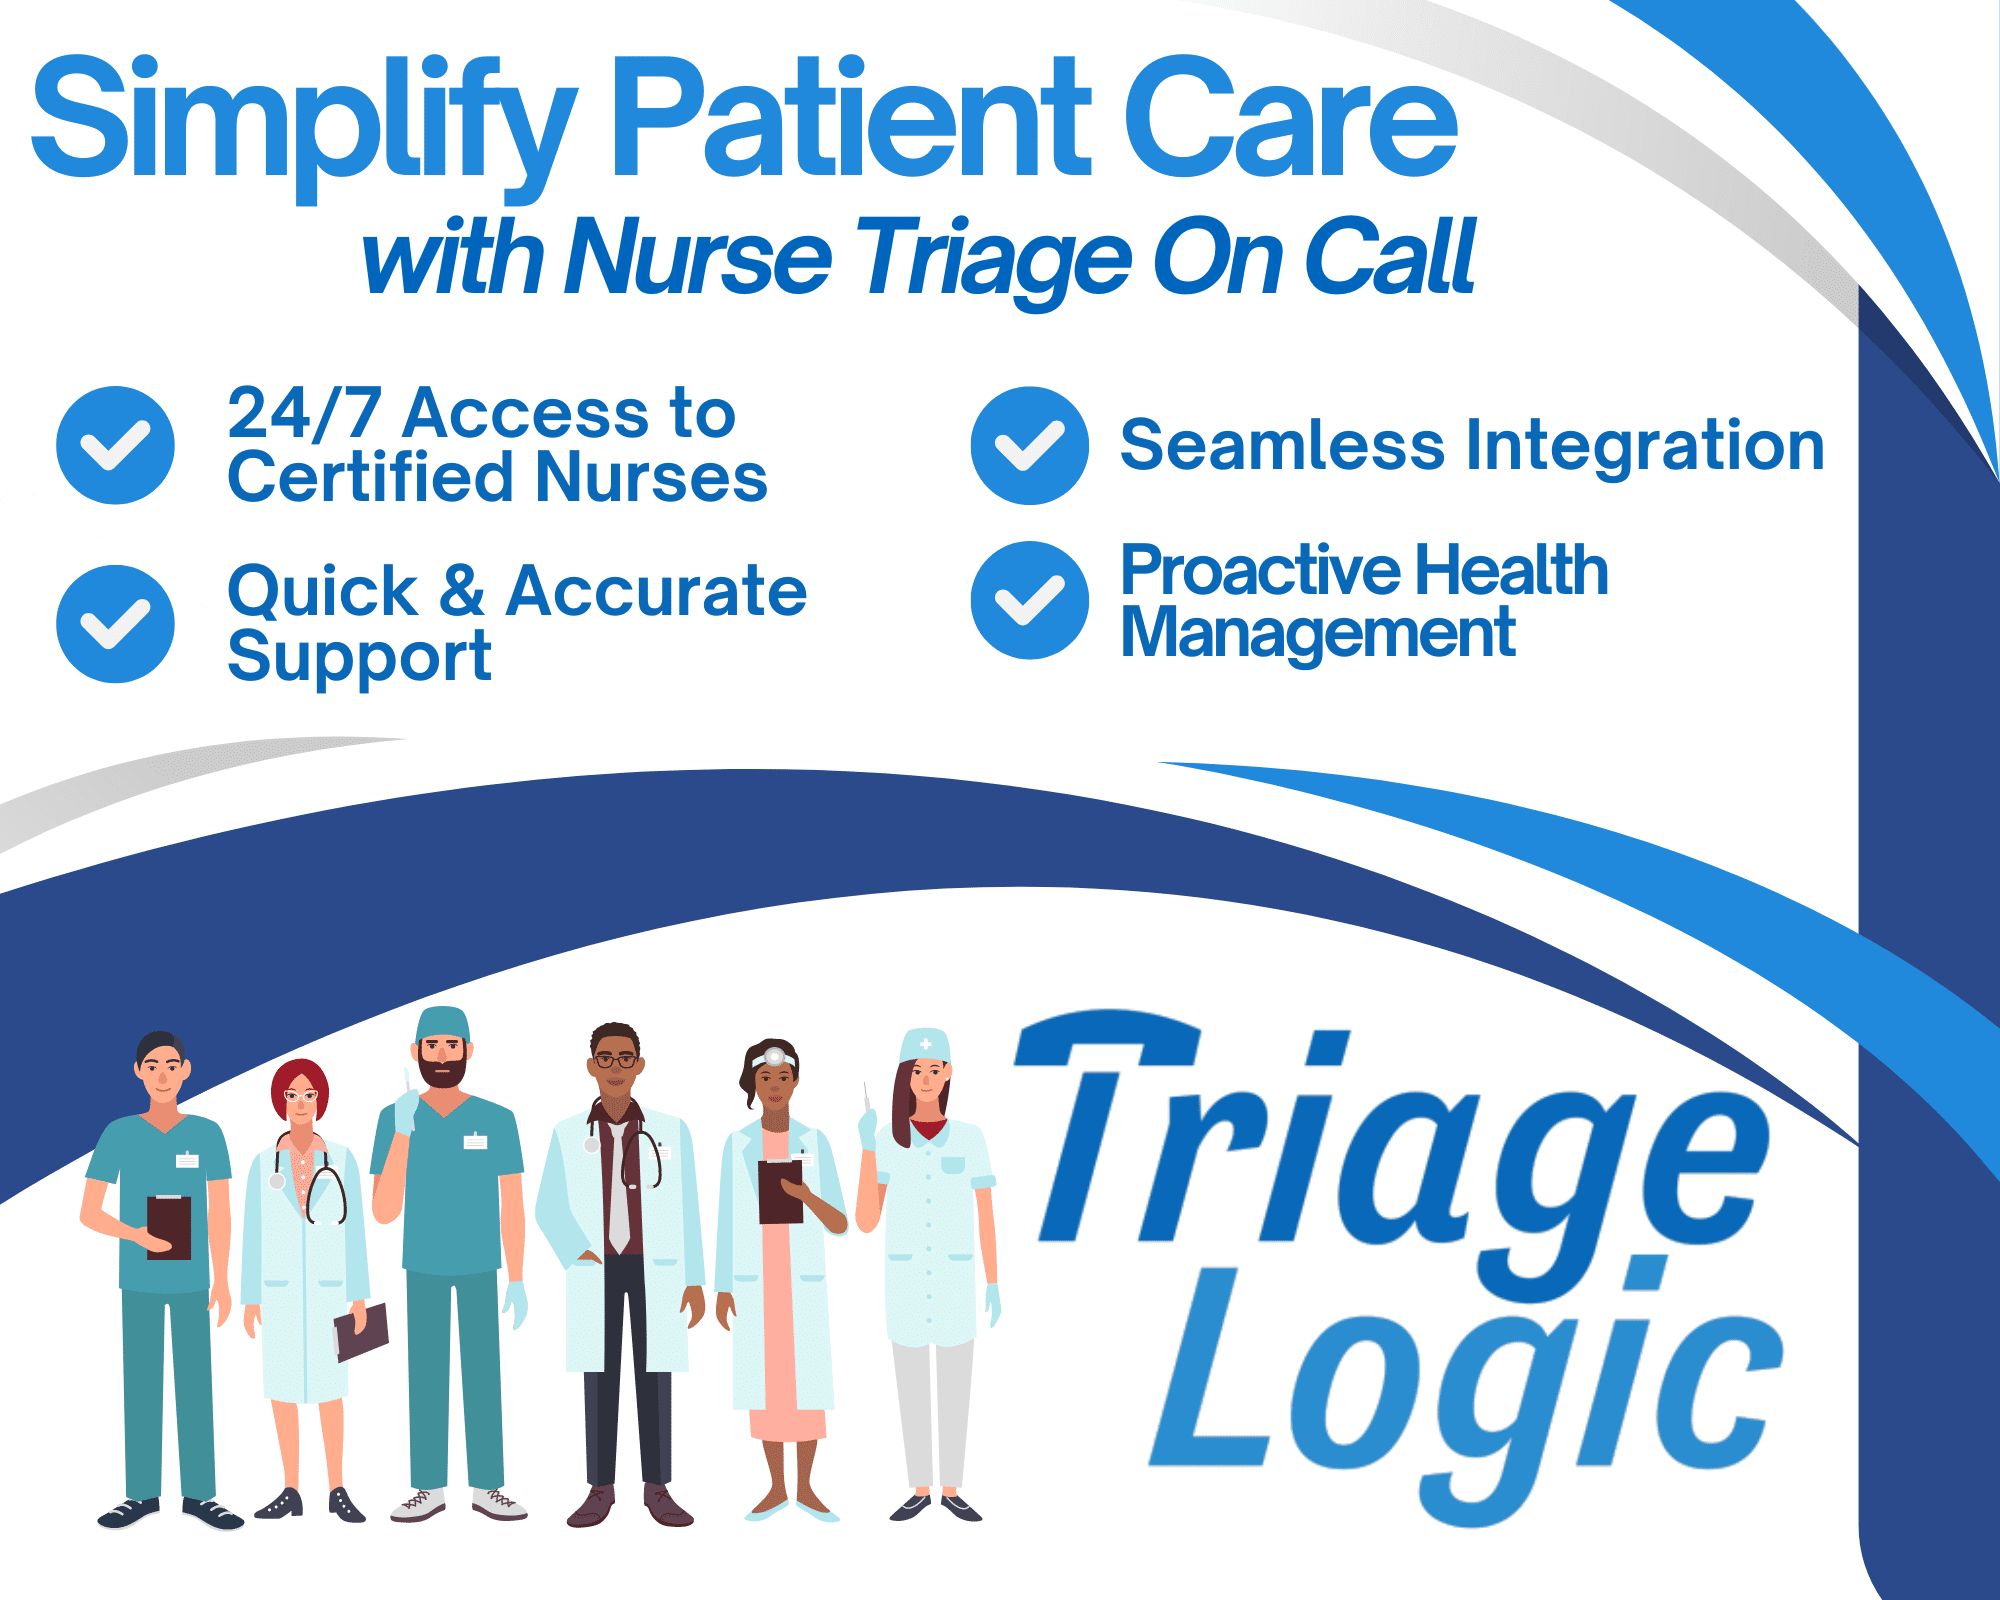 A chart of benefits using TriageLogic's Nurse Triage On Call includes illustrations of healthcare workers.